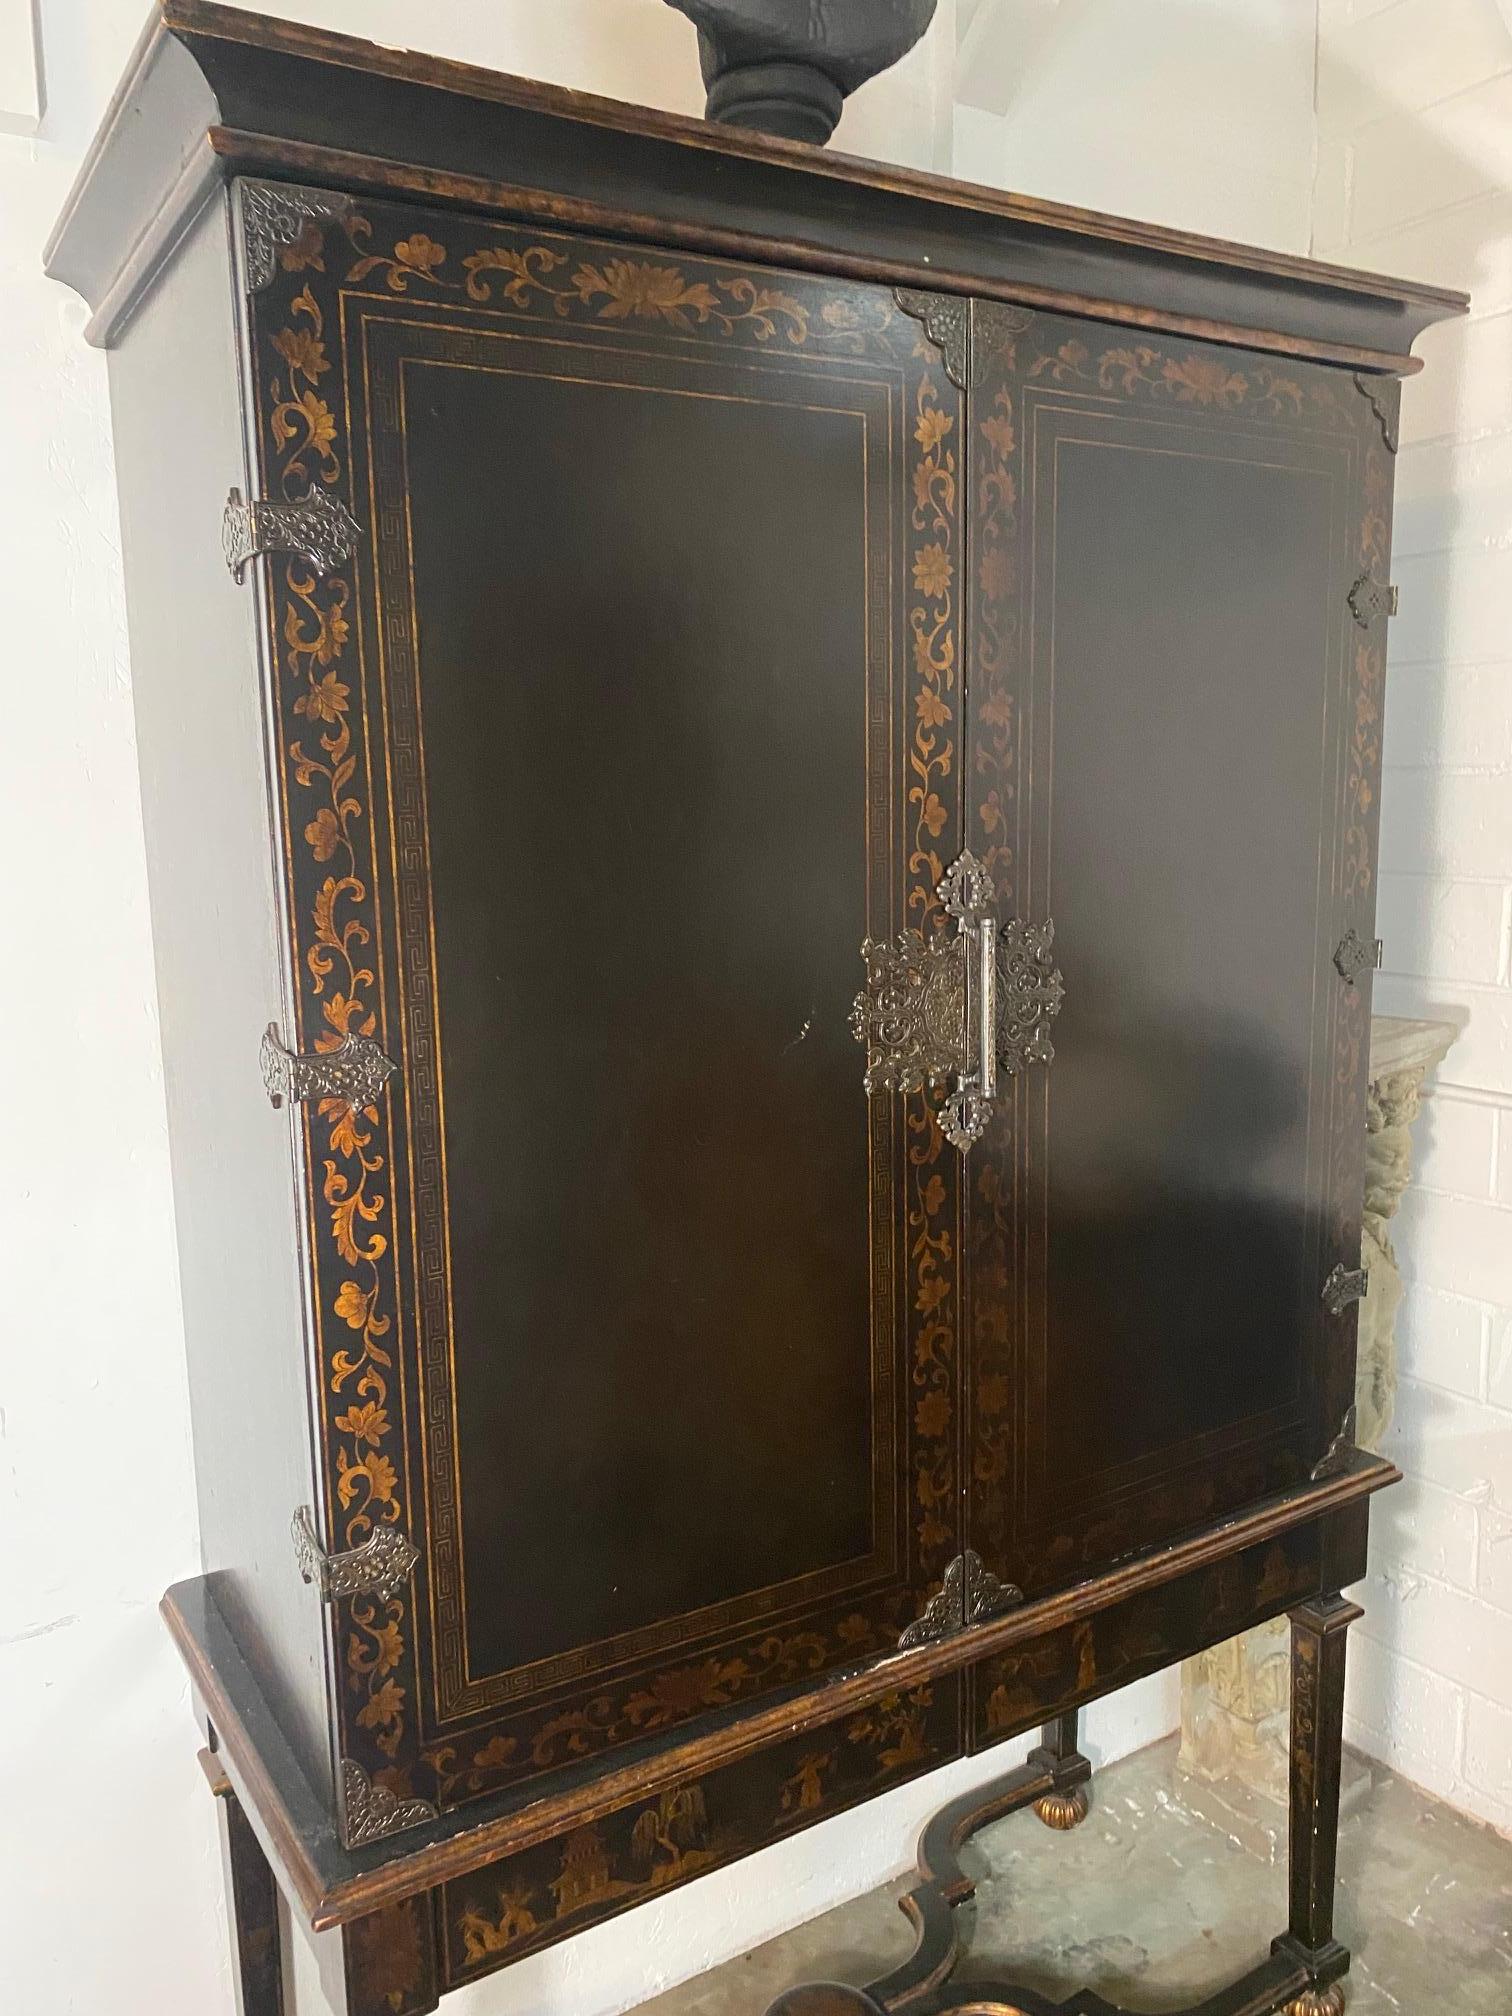 Introducing an exquisite Tete De Négre Chinoiserie TV and Media Cabinet/Armoire, a stunning piece of furniture that combines modern functionality with classic style. Hand-crafted from the finest alder wood, this armoire is designed to accommodate a